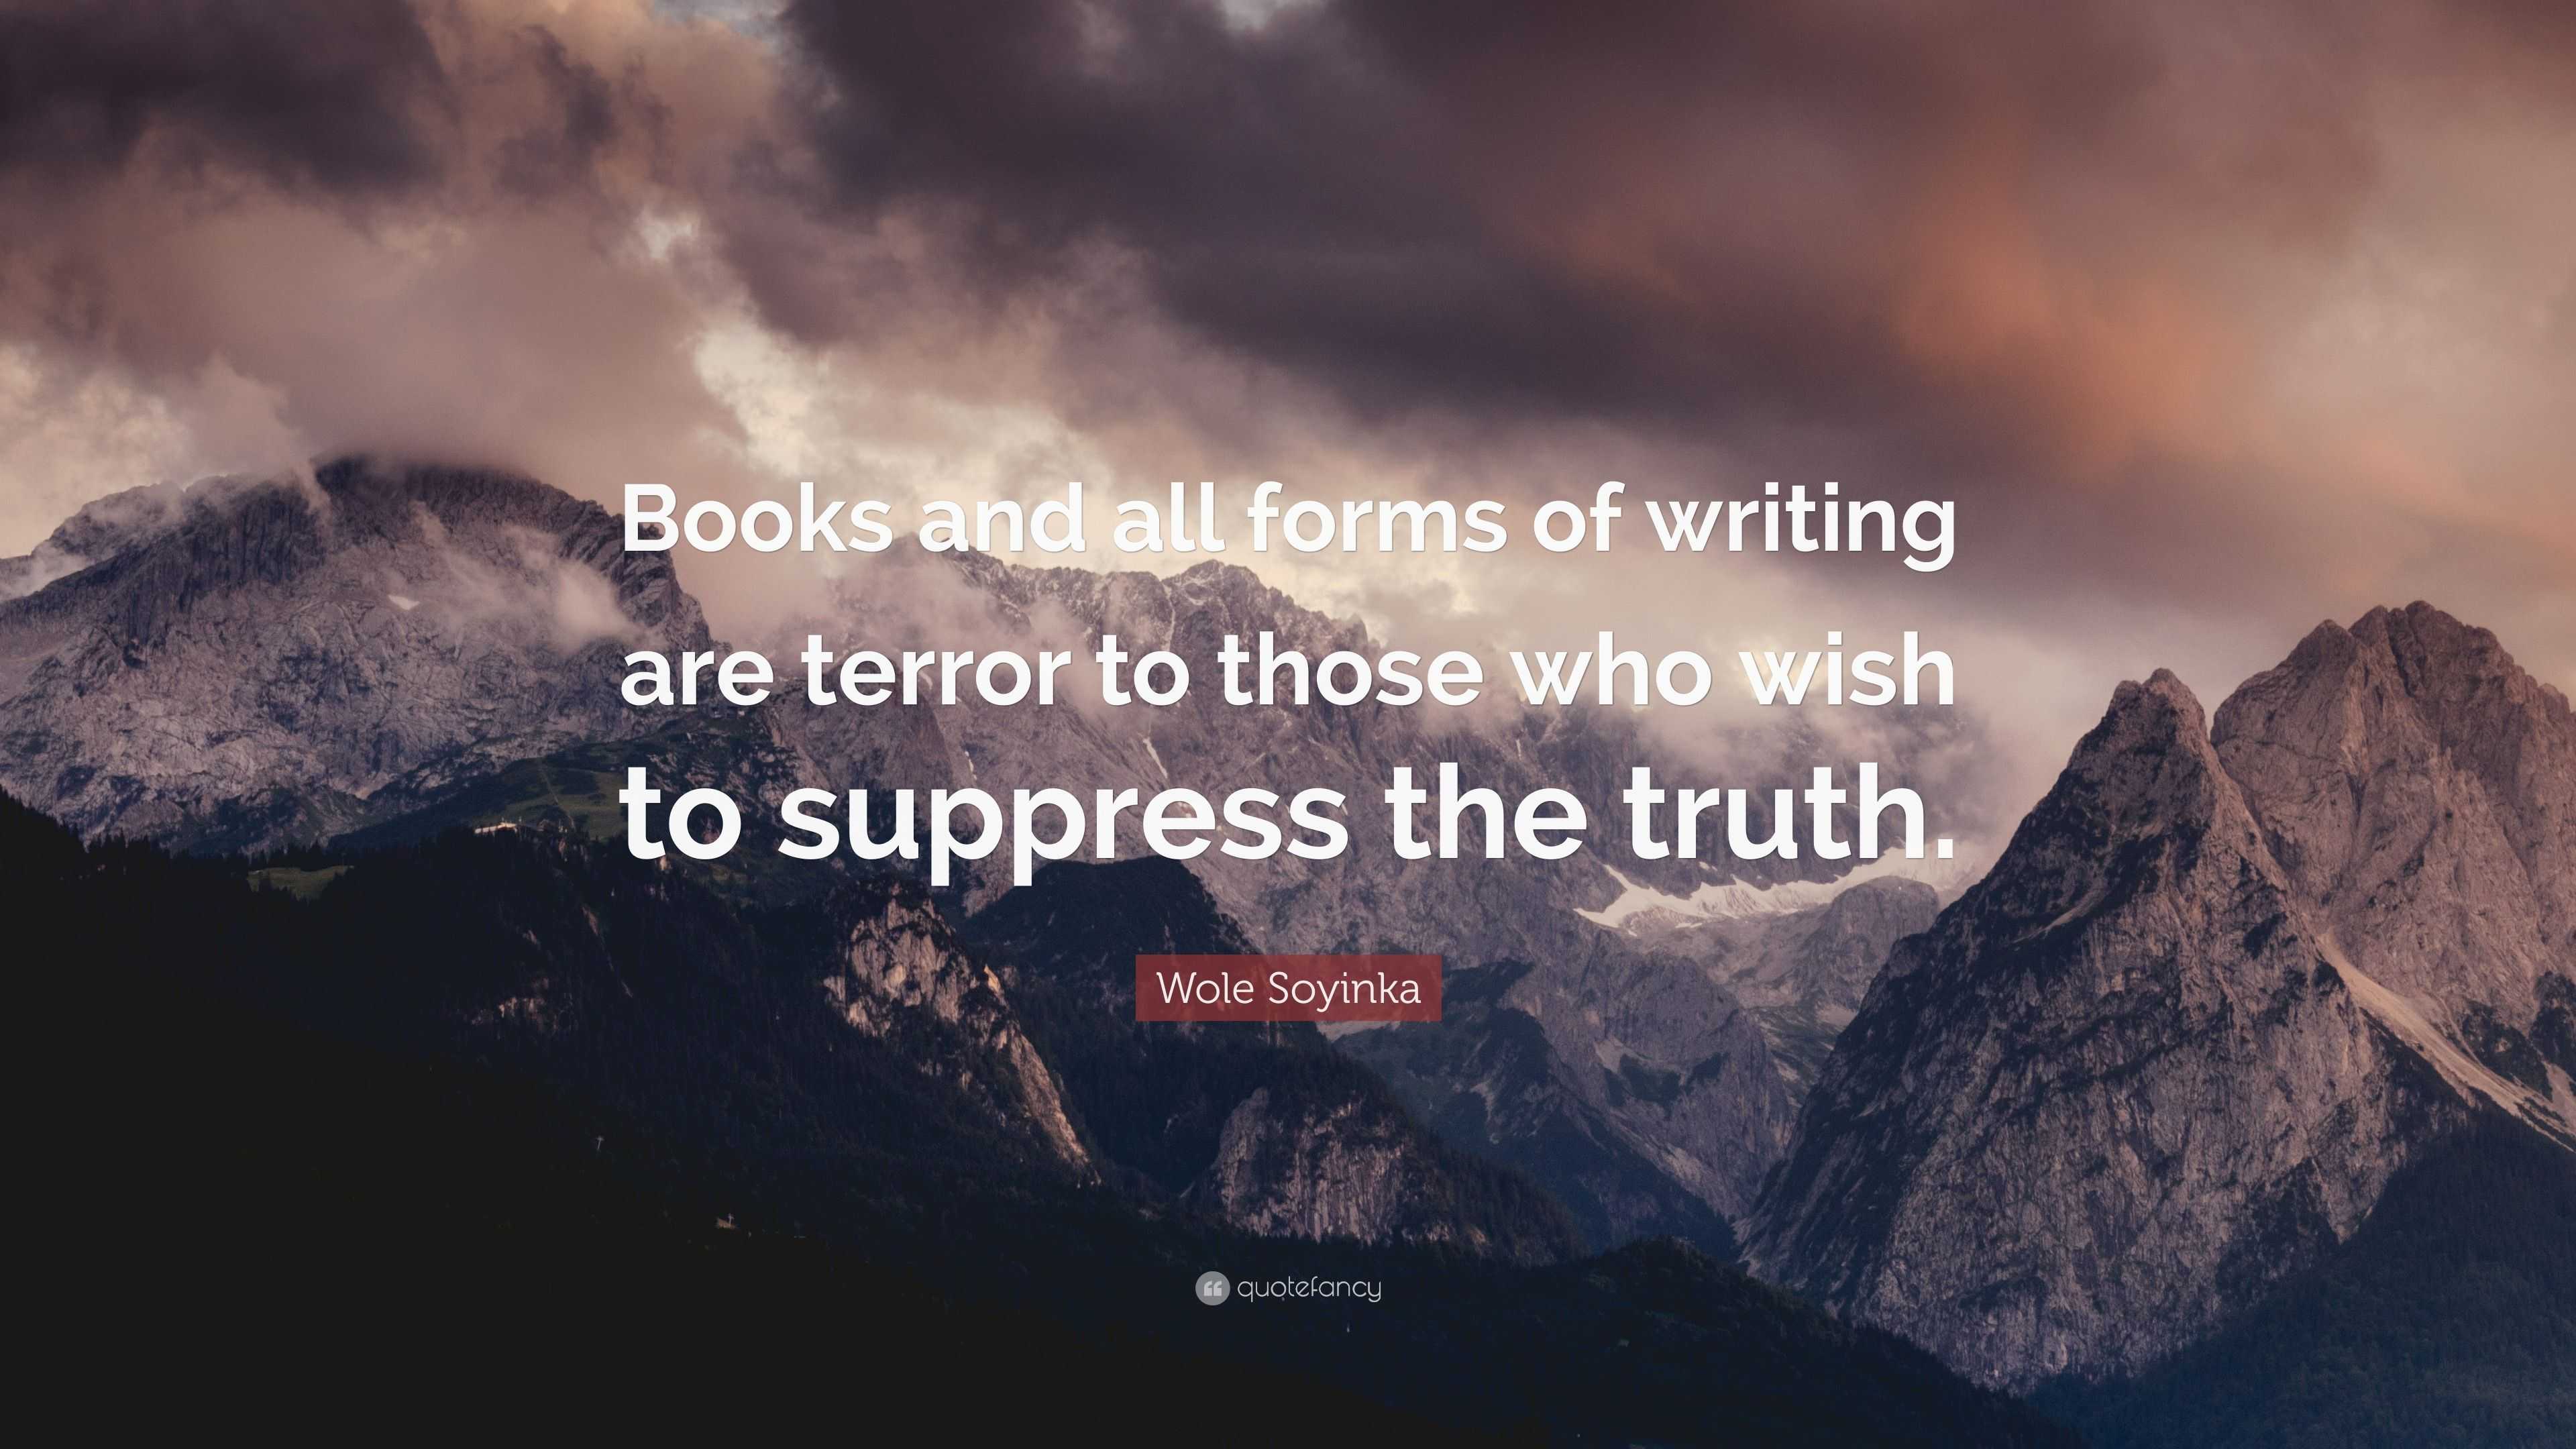 wole-soyinka-quote-books-and-all-forms-of-writing-are-terror-to-those-who-wish-to-suppress-the